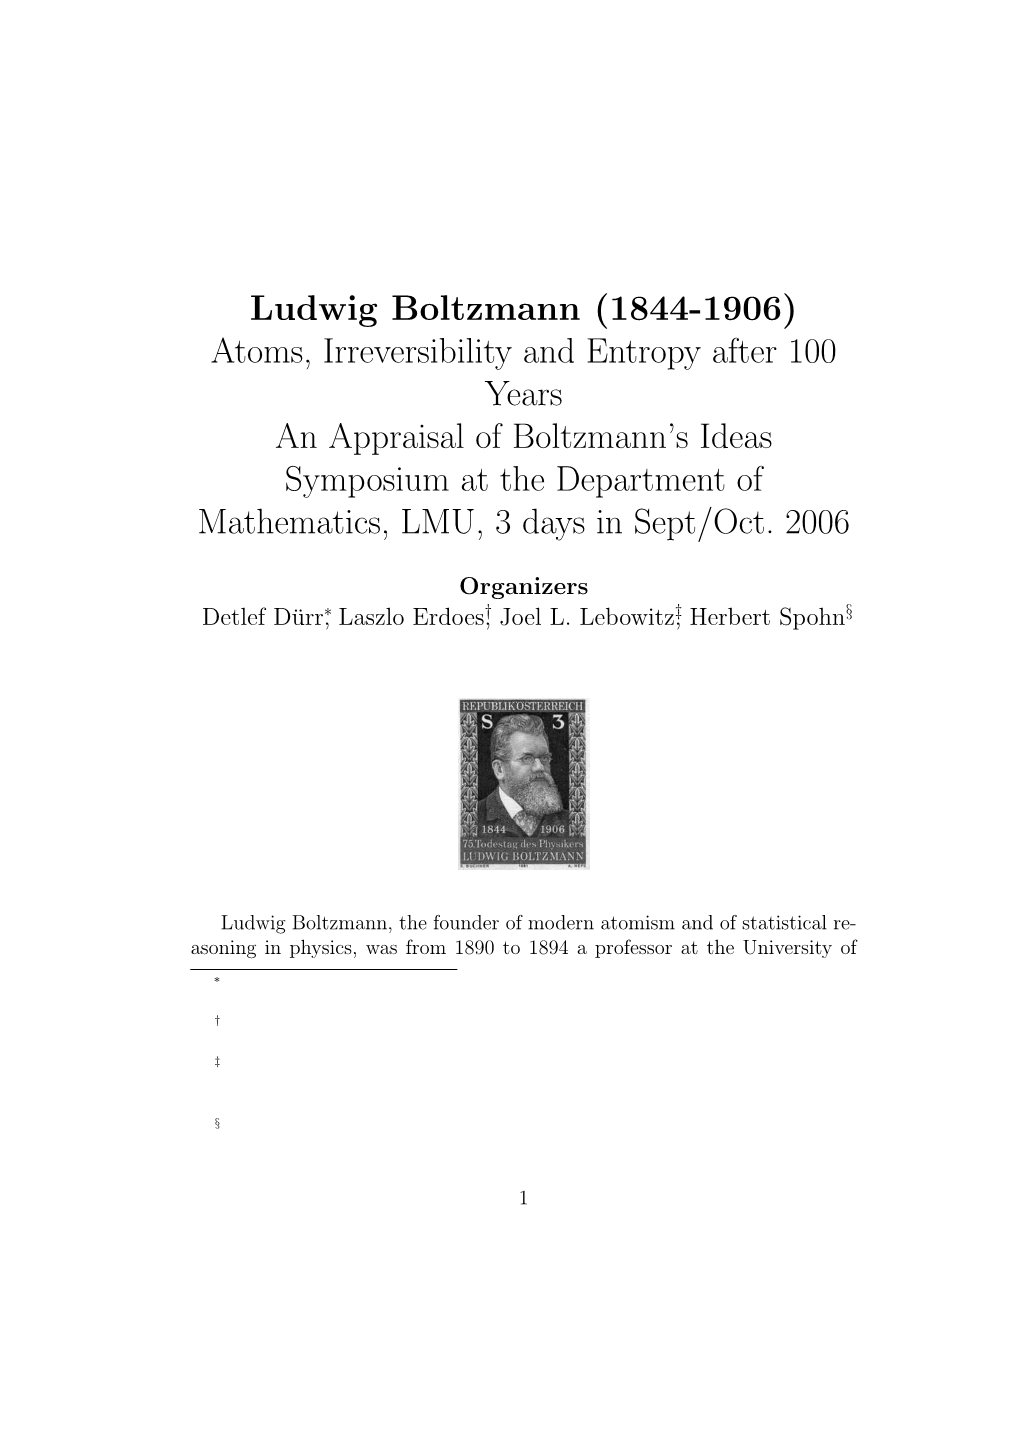 Ludwig Boltzmann (1844-1906) Atoms, Irreversibility and Entropy After